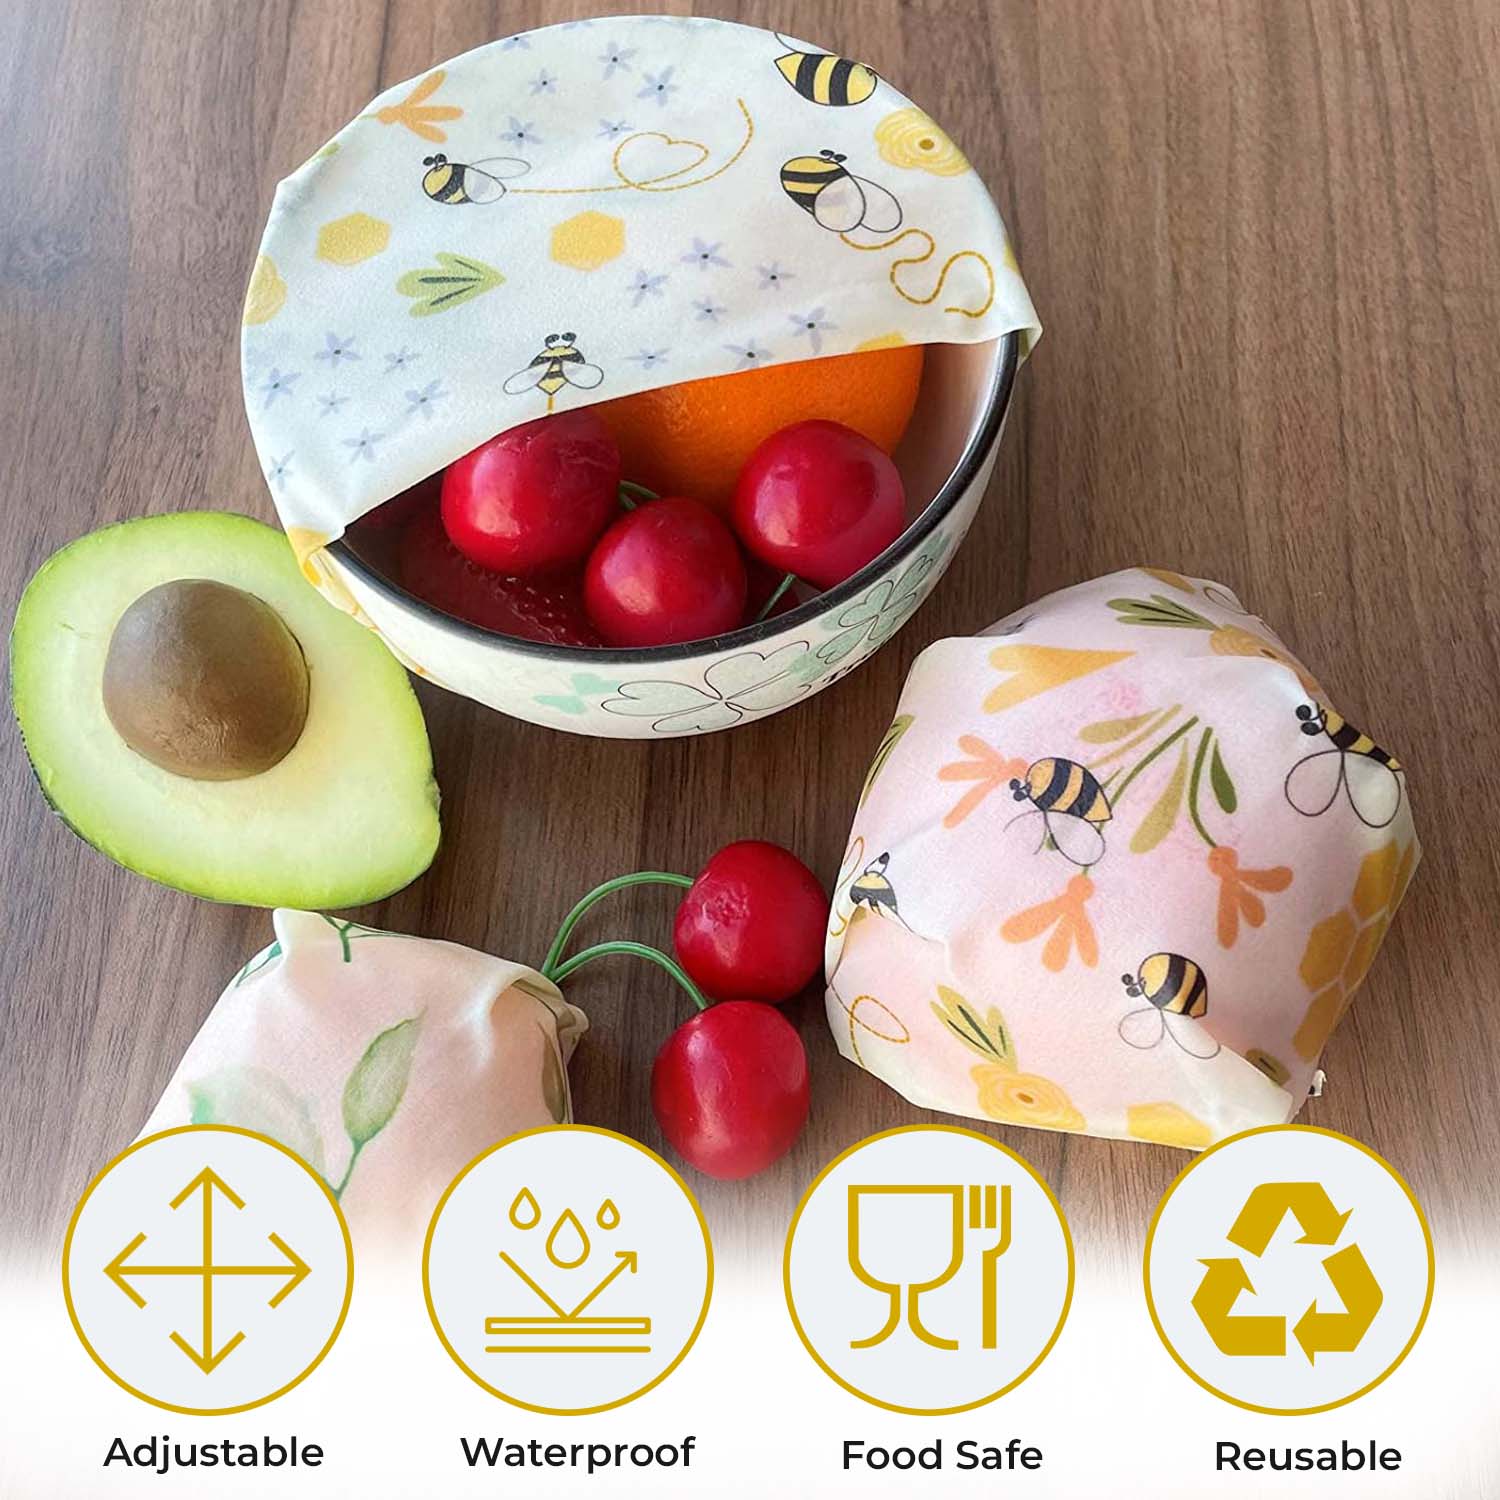 Lilymeche Concept Reusable Beeswax Wrap(9 Pack) Eco-Friendly Beeswax Food Wraps, Bread Sandwich Wrapper, Organic, Sustainable, Biodegradable, Zero